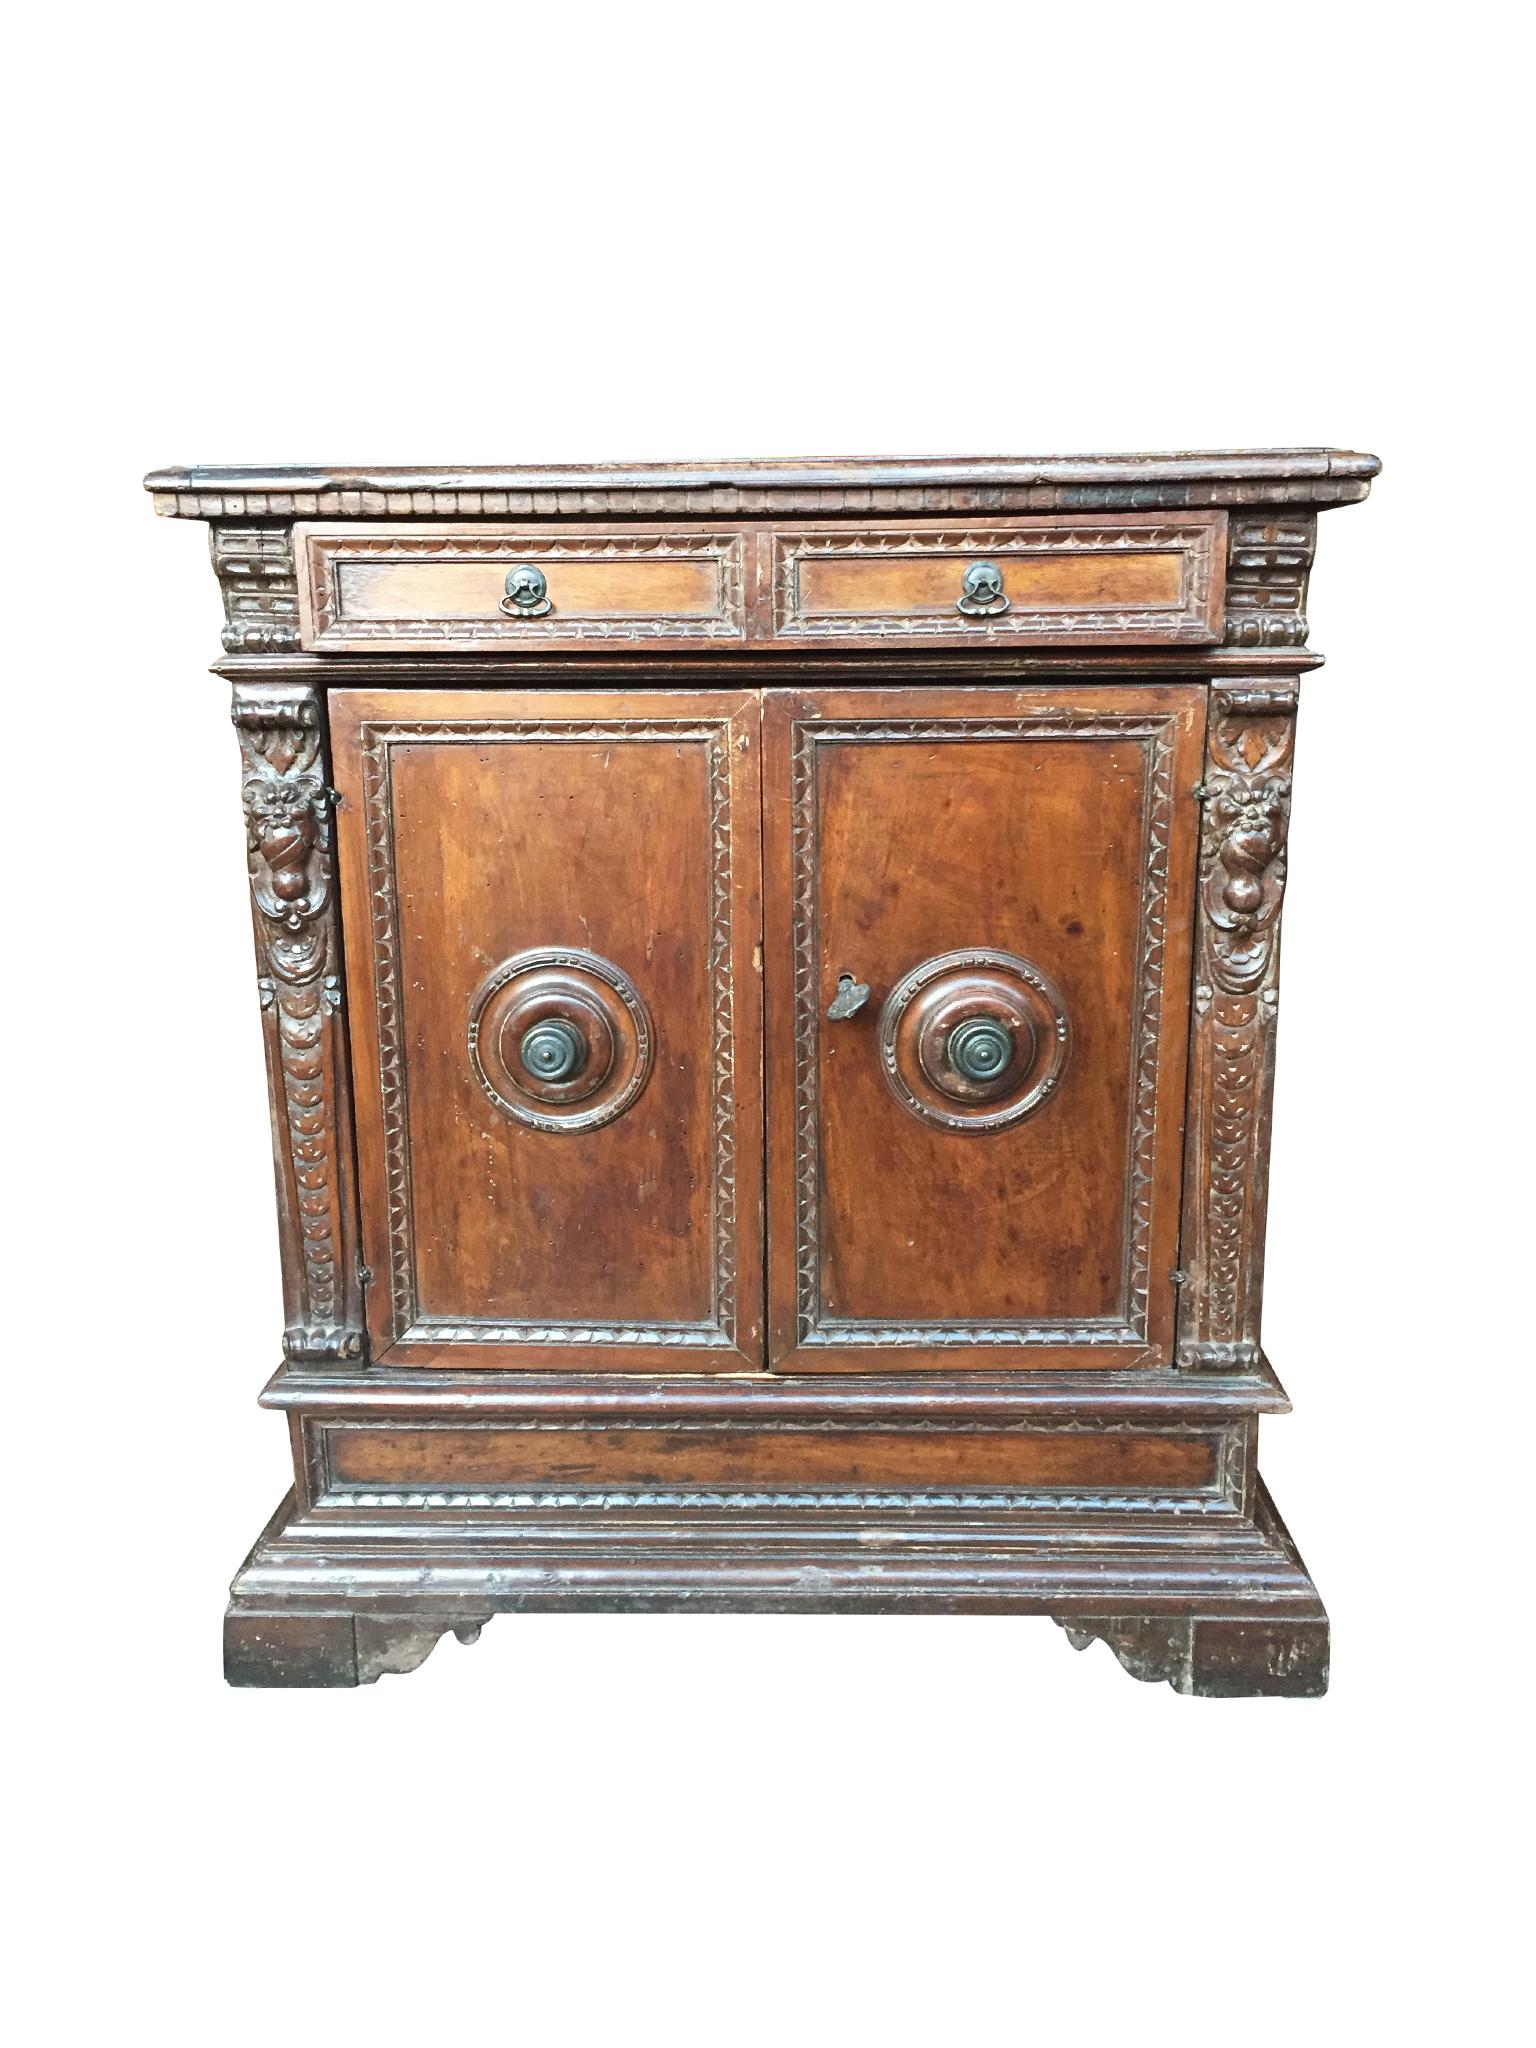 This handsome Italian cabinet was handcrafted in the 18th century. It is comprised of walnut wood with carved decorative trimming and iron hardware. The cabinet is a flattop with a single top drawer. The main body is designed with two doors that